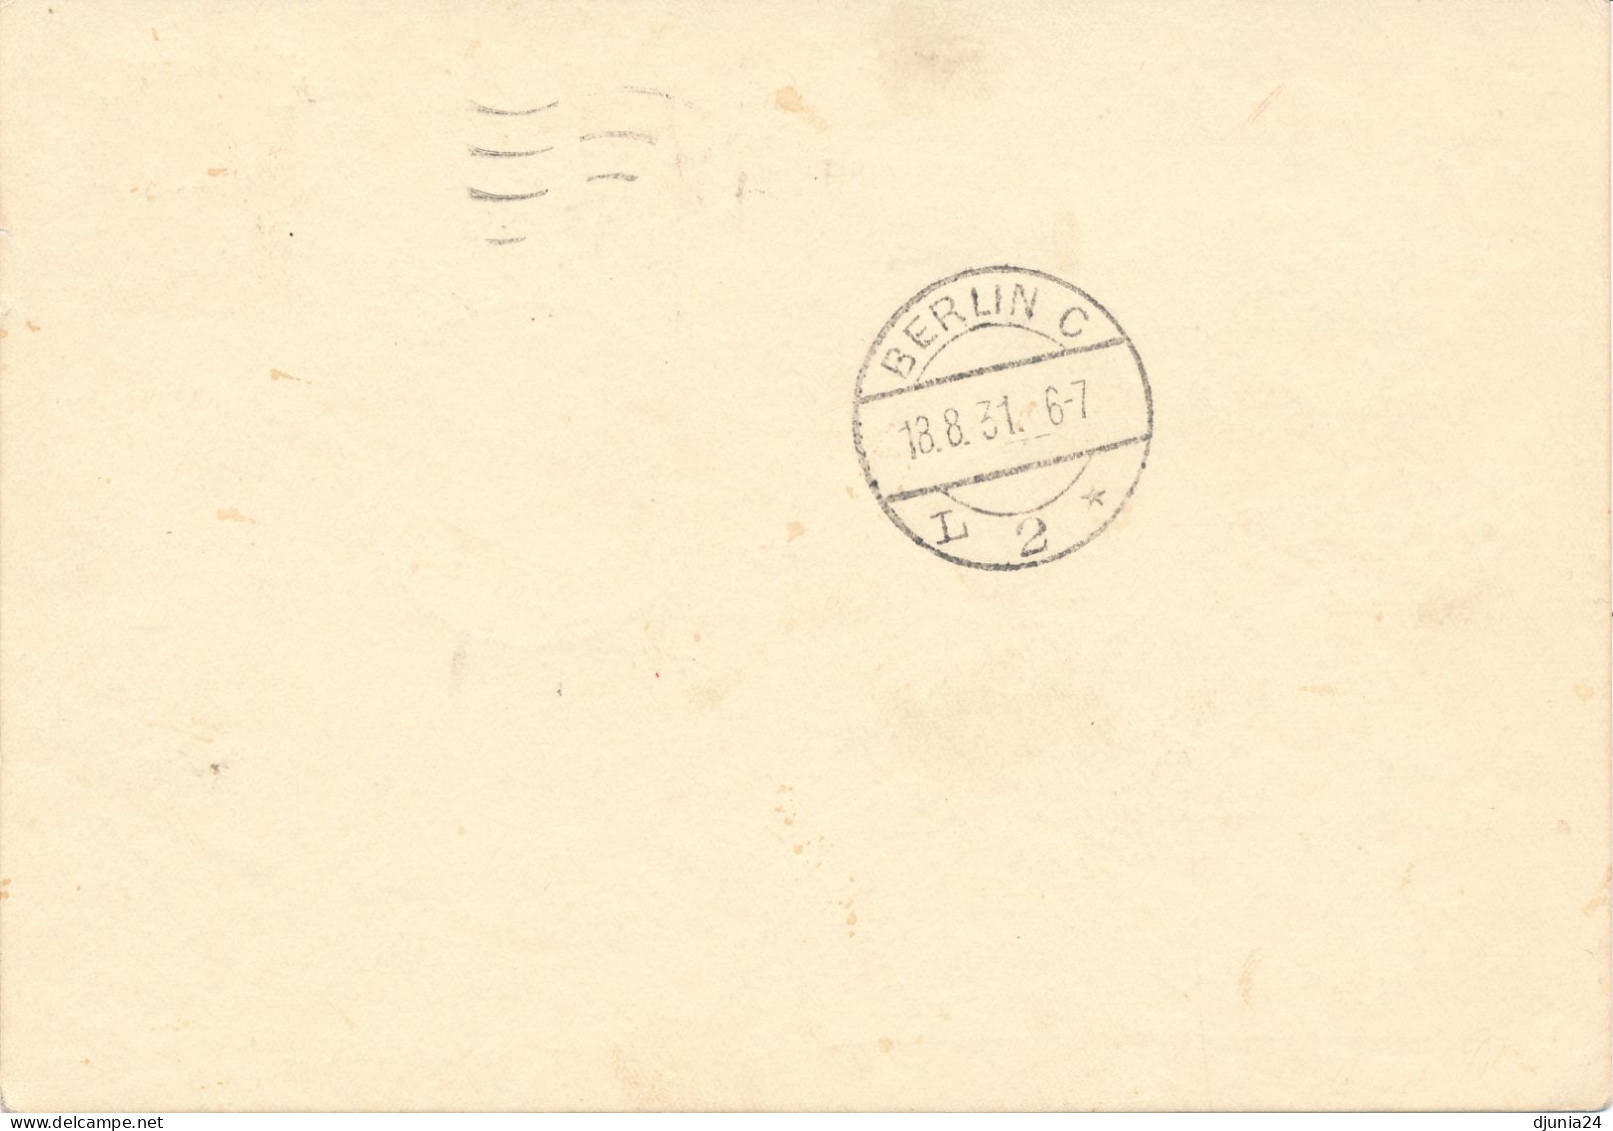 BF0650 / ENGLAND - HULL  -  16.8.31  , By Air Ship Graf Zeppelin  -  Nach Bad Salzelmen - Stamped Stationery, Airletters & Aerogrammes